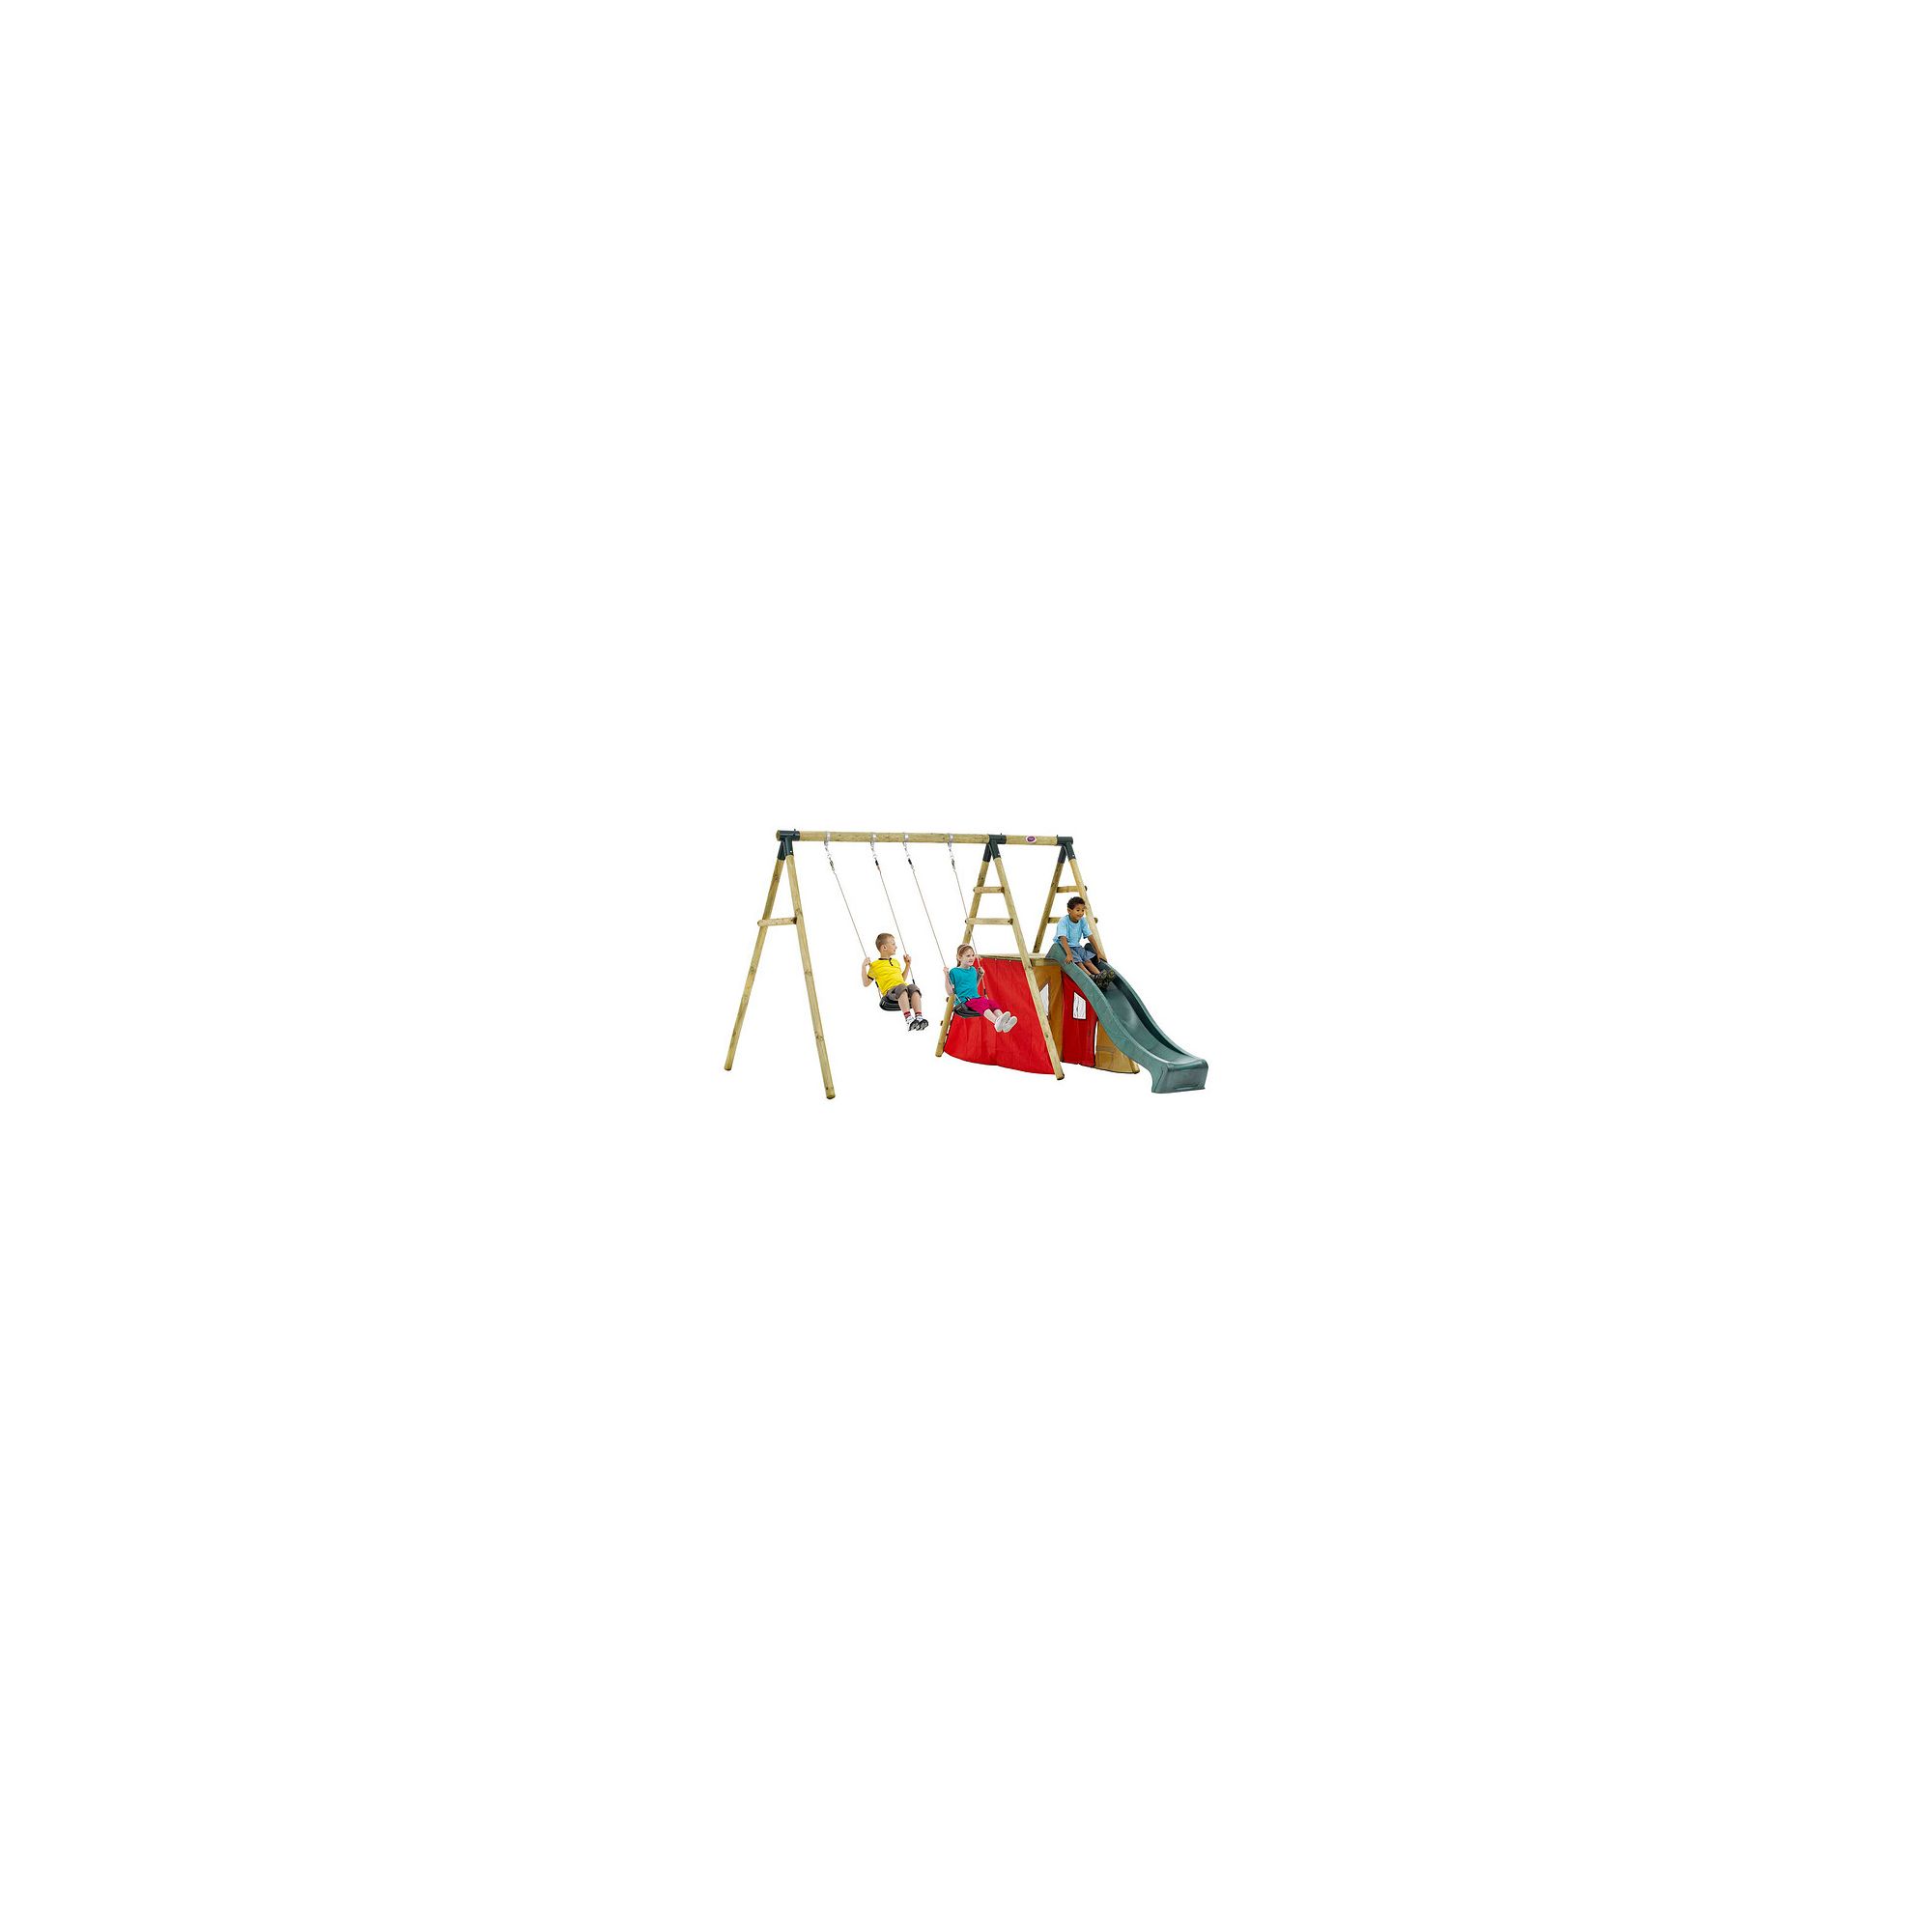 Plum Chacma Wooden Garden Swing Set at Tesco Direct